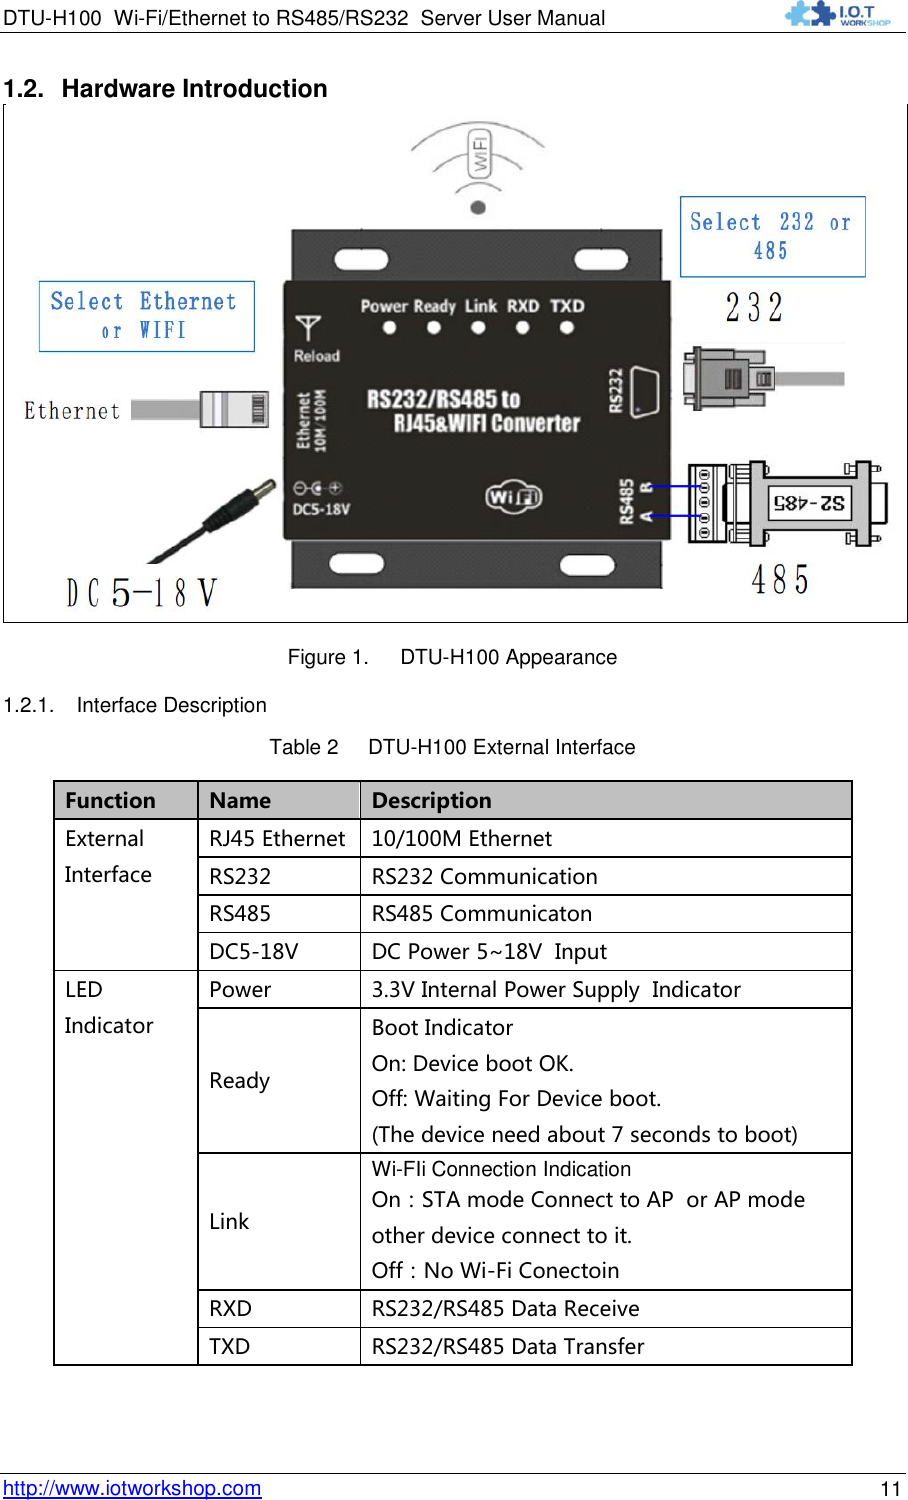 DTU-H100 Wi-Fi/Ethernet to RS485/RS232  Server User Manual    http://www.iotworkshop.com 11 1.2. Hardware Introduction  Figure 1. DTU-H100 Appearance 1.2.1. Interface Description Table 2     DTU-H100 External Interface Function Name Description External Interface RJ45 Ethernet 10/100M Ethernet RS232 RS232 Communication RS485 RS485 Communicaton DC5-18V DC Power 5~18V  Input  LED Indicator Power 3.3V Internal Power Supply  Indicator Ready Boot Indicator On: Device boot OK. Off: Waiting For Device boot. (The device need about 7 seconds to boot) Link Wi-FIi Connection Indication On：STA mode Connect to AP  or AP mode other device connect to it. Off：No Wi-Fi Conectoin RXD RS232/RS485 Data Receive TXD RS232/RS485 Data Transfer 